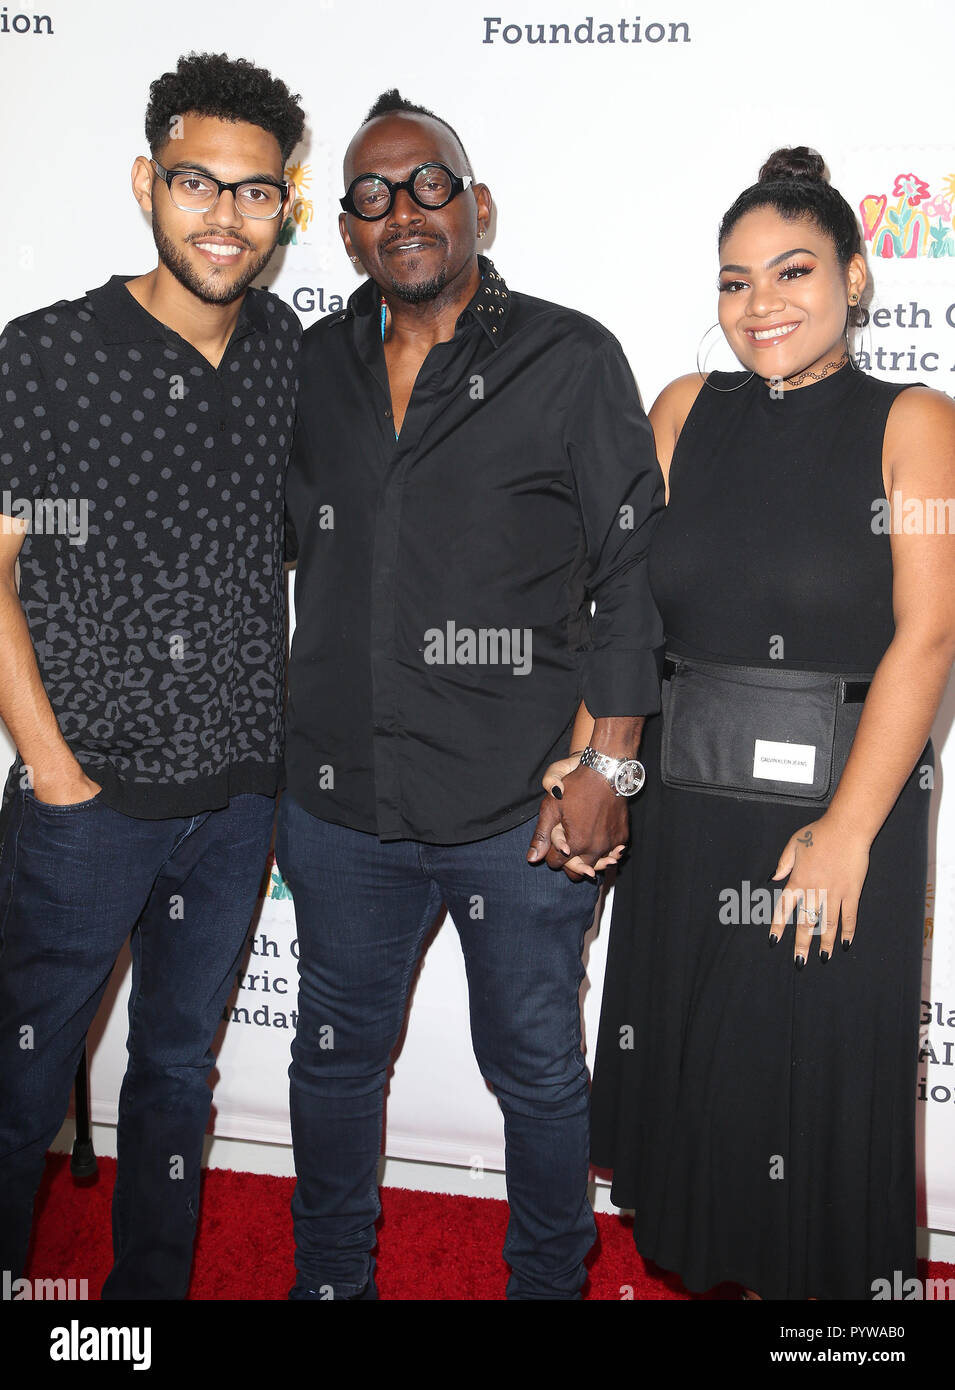 Cuver City, California, USA. 27th Oct, 2018. Jordan Jackson, Randy Jackson, Zoe Jackson during arrivals for the Elizabeth Glaser Pediatric AIDS Foundation's Annual ''A Time For Heroes'' Family Festival. Credit: Faye Sadou/AdMedia/ZUMA Wire/Alamy Live News Stock Photo